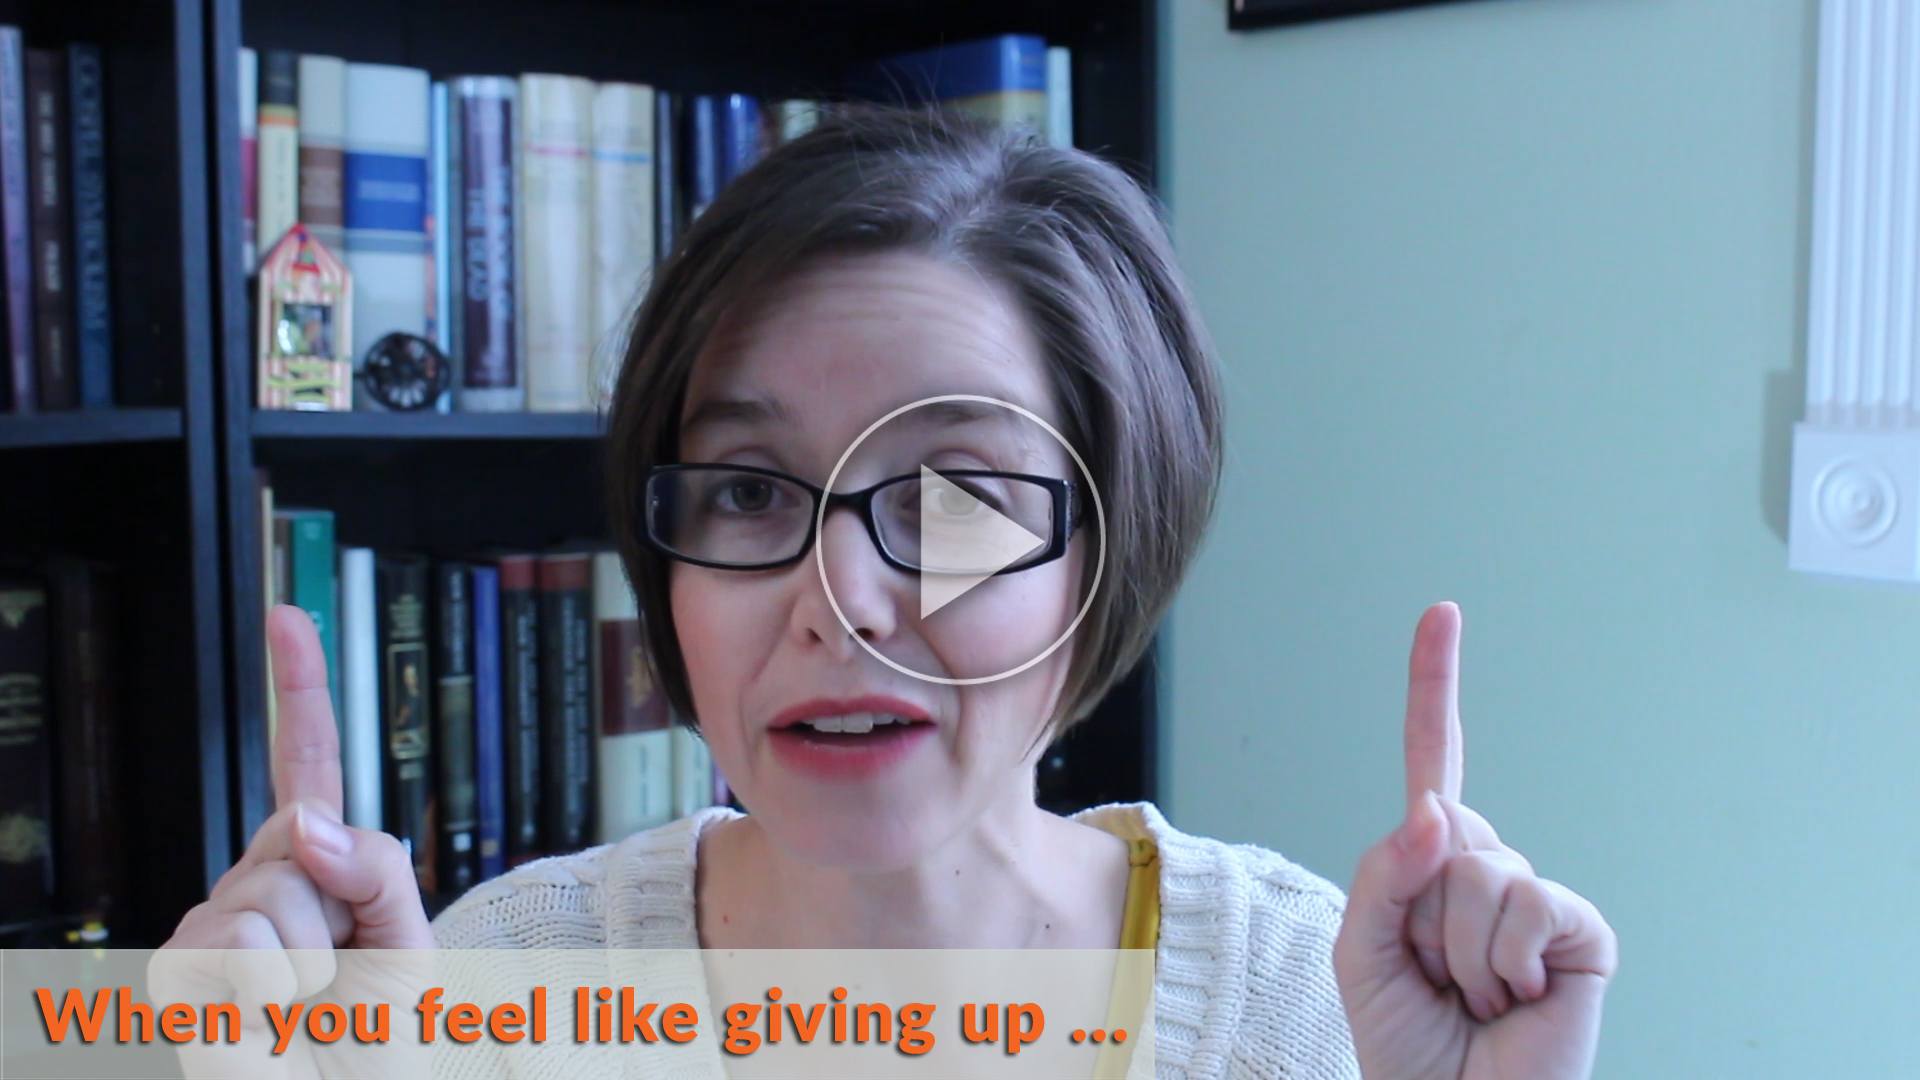 Simple homeschool phrase to use when you feel like giving up